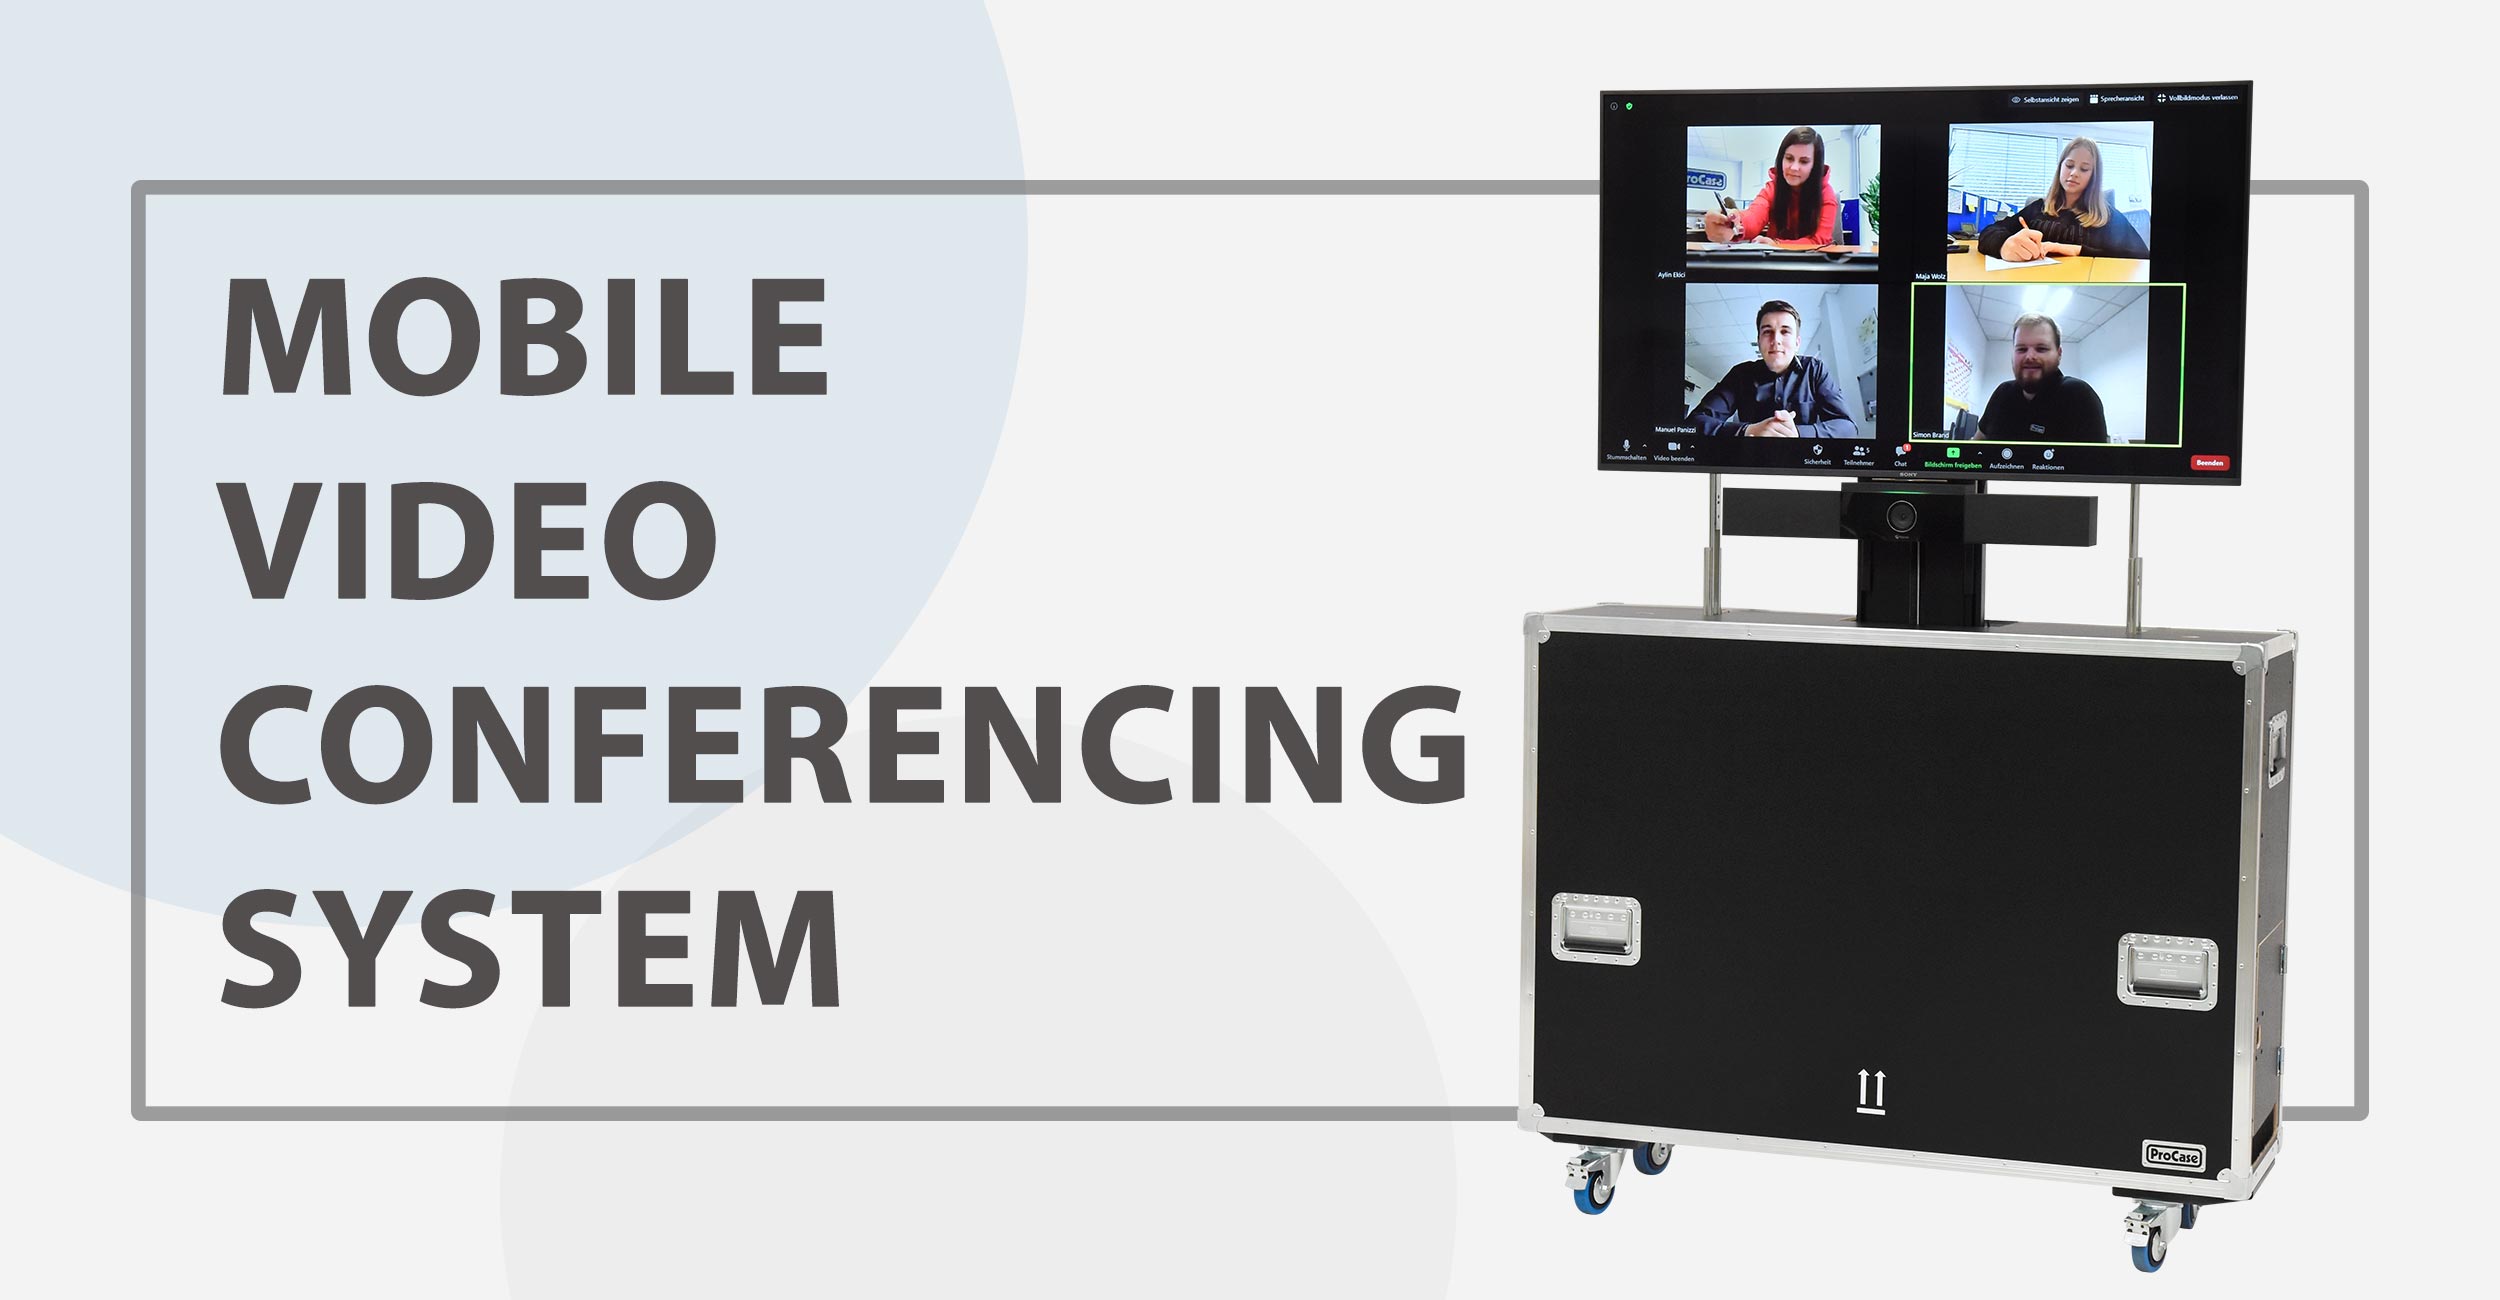 Mobile Video Conferencing System